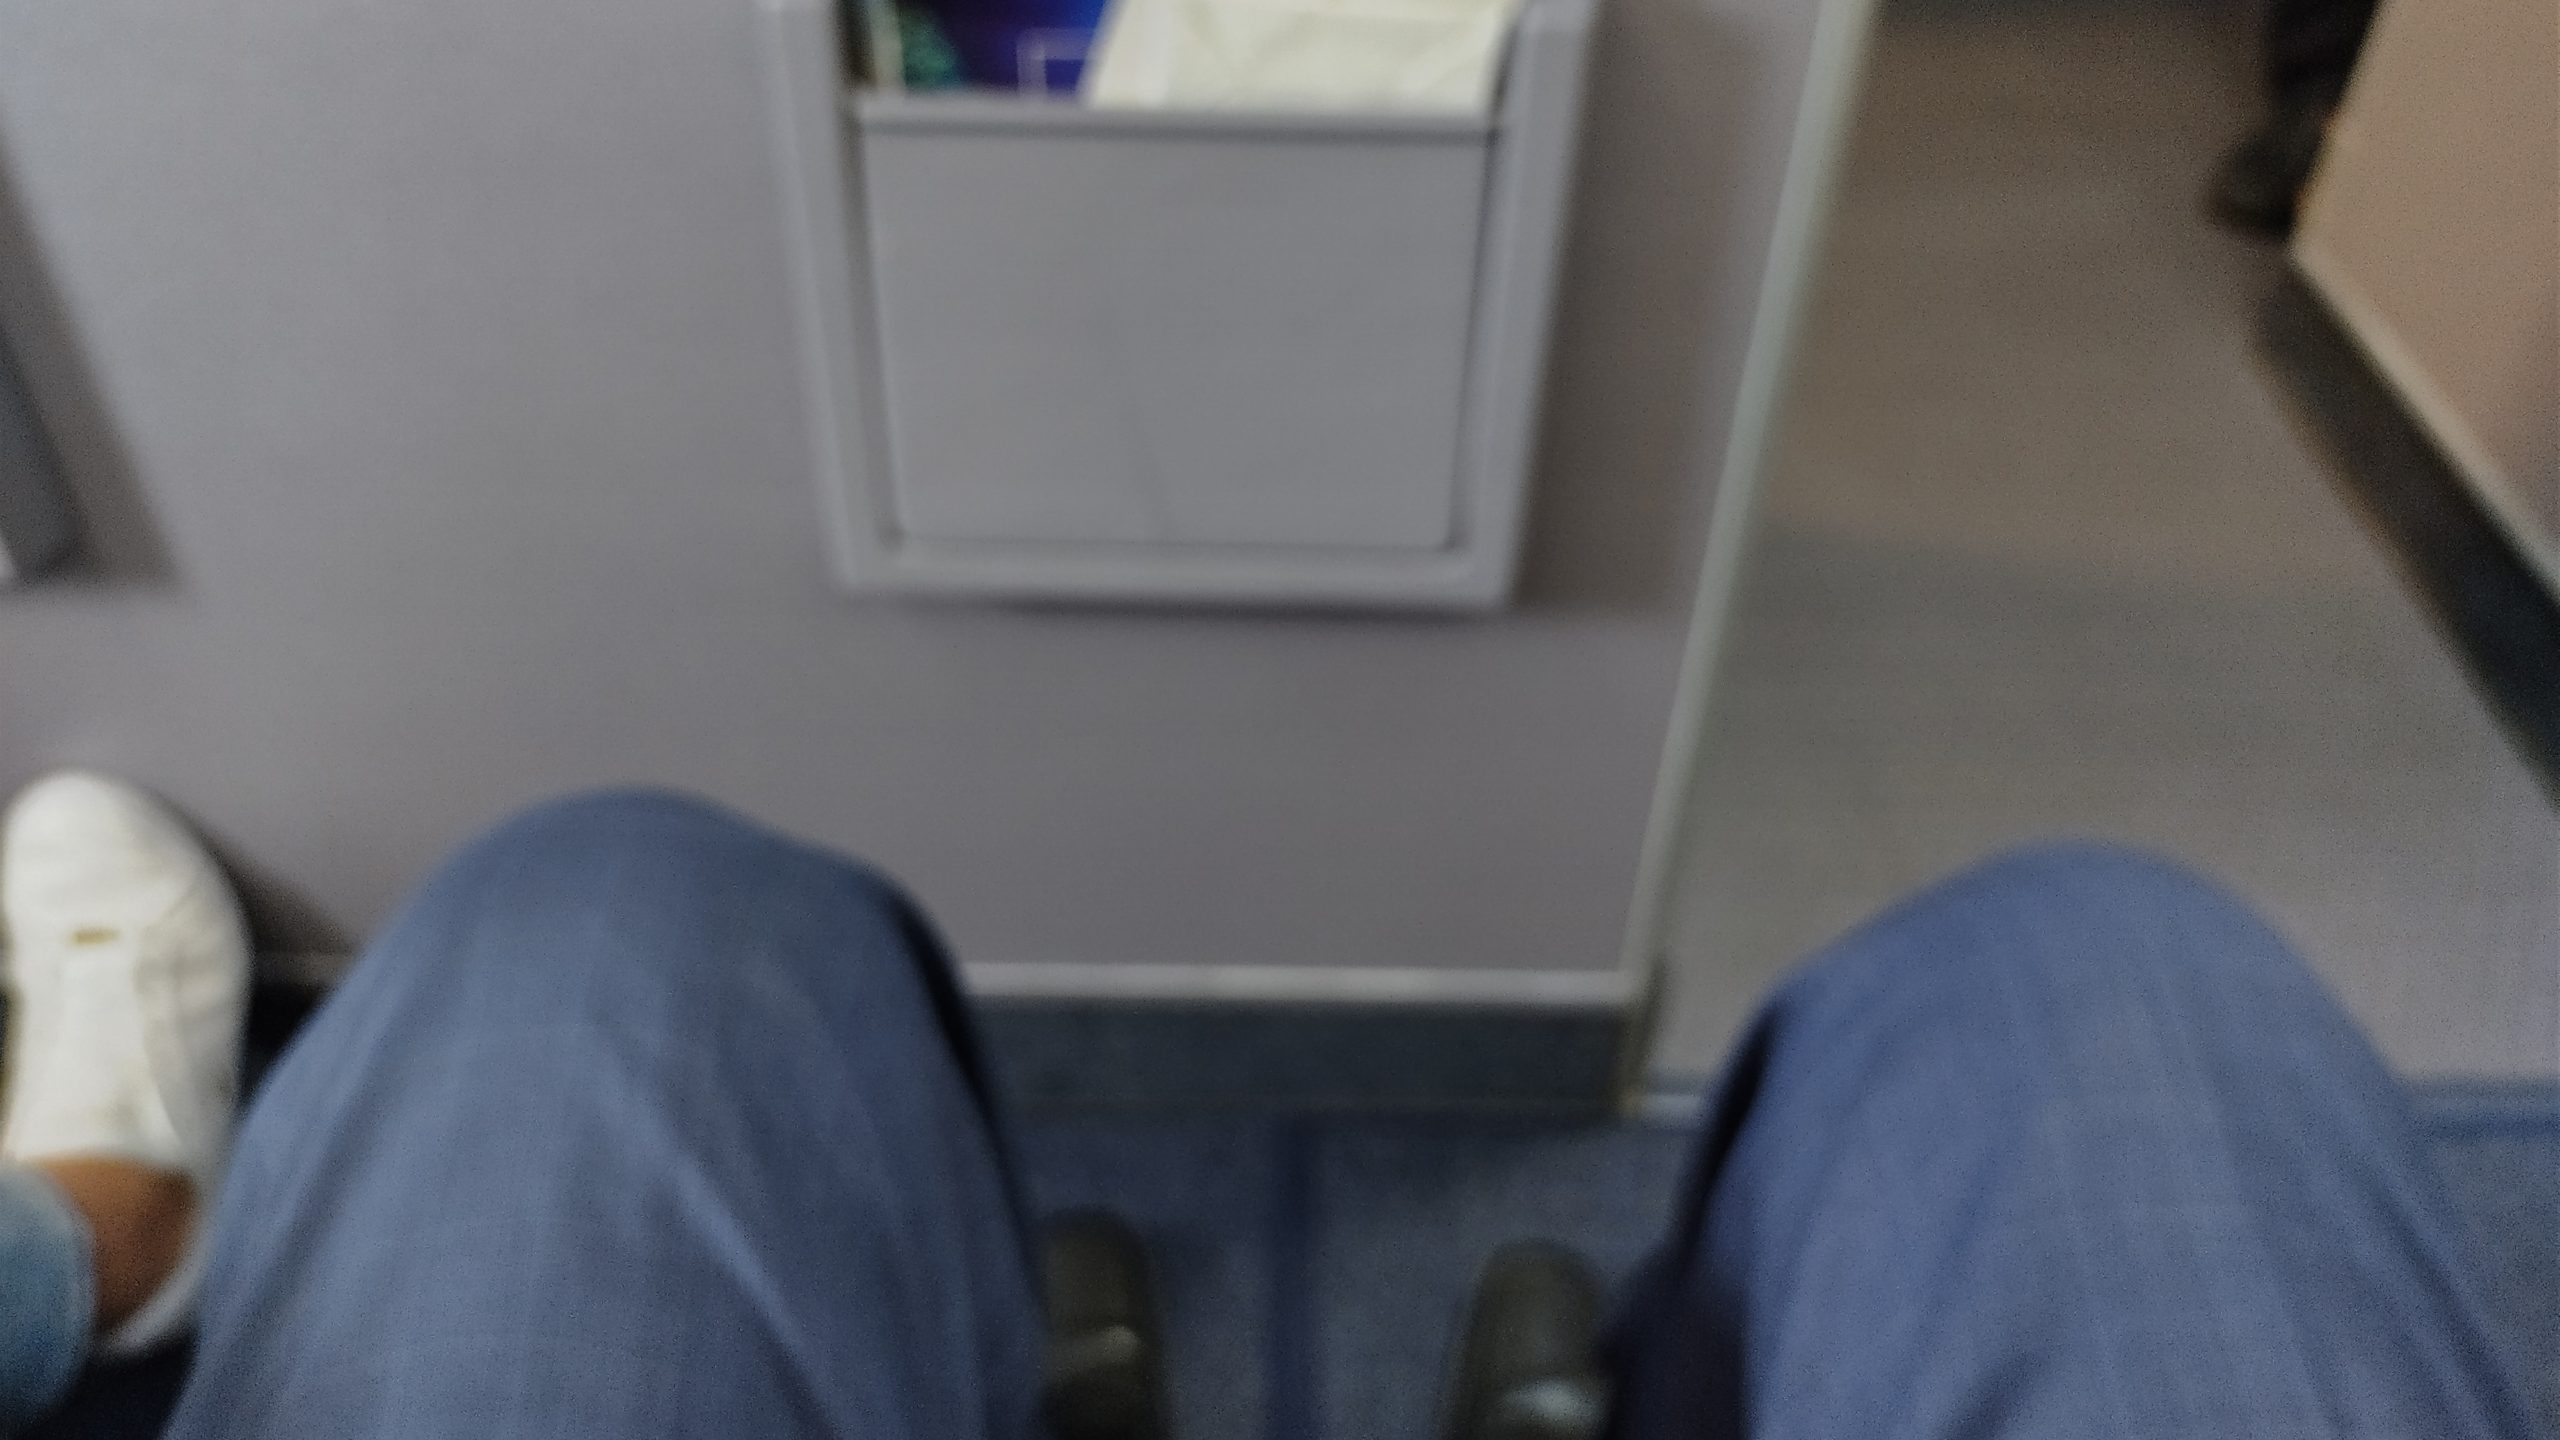 PICTURE OF LEG ROOM AT SEAT